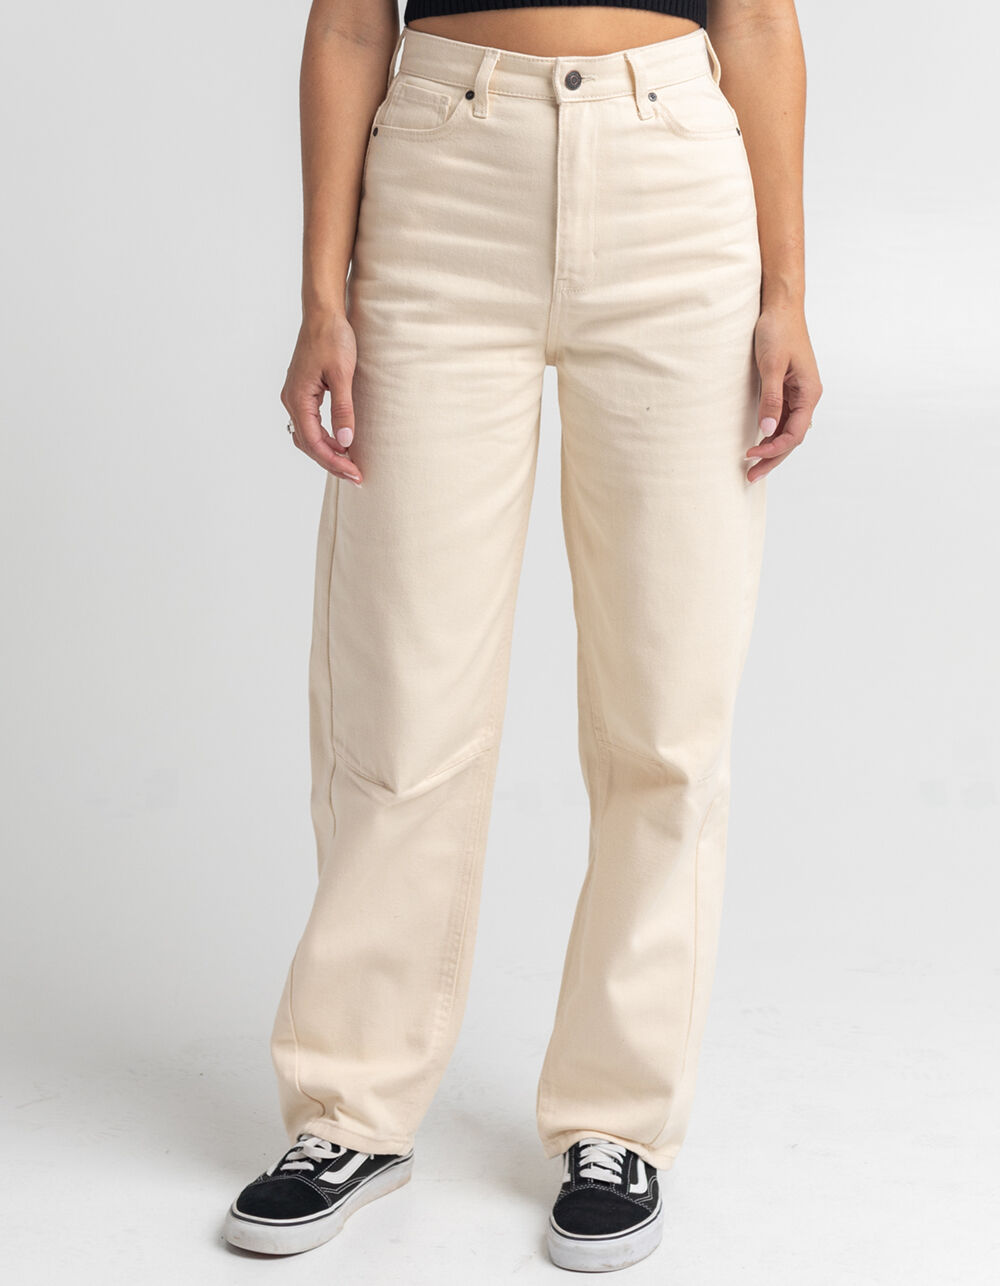 RSQ Baggy Womens Jeans - CREAM | Tillys